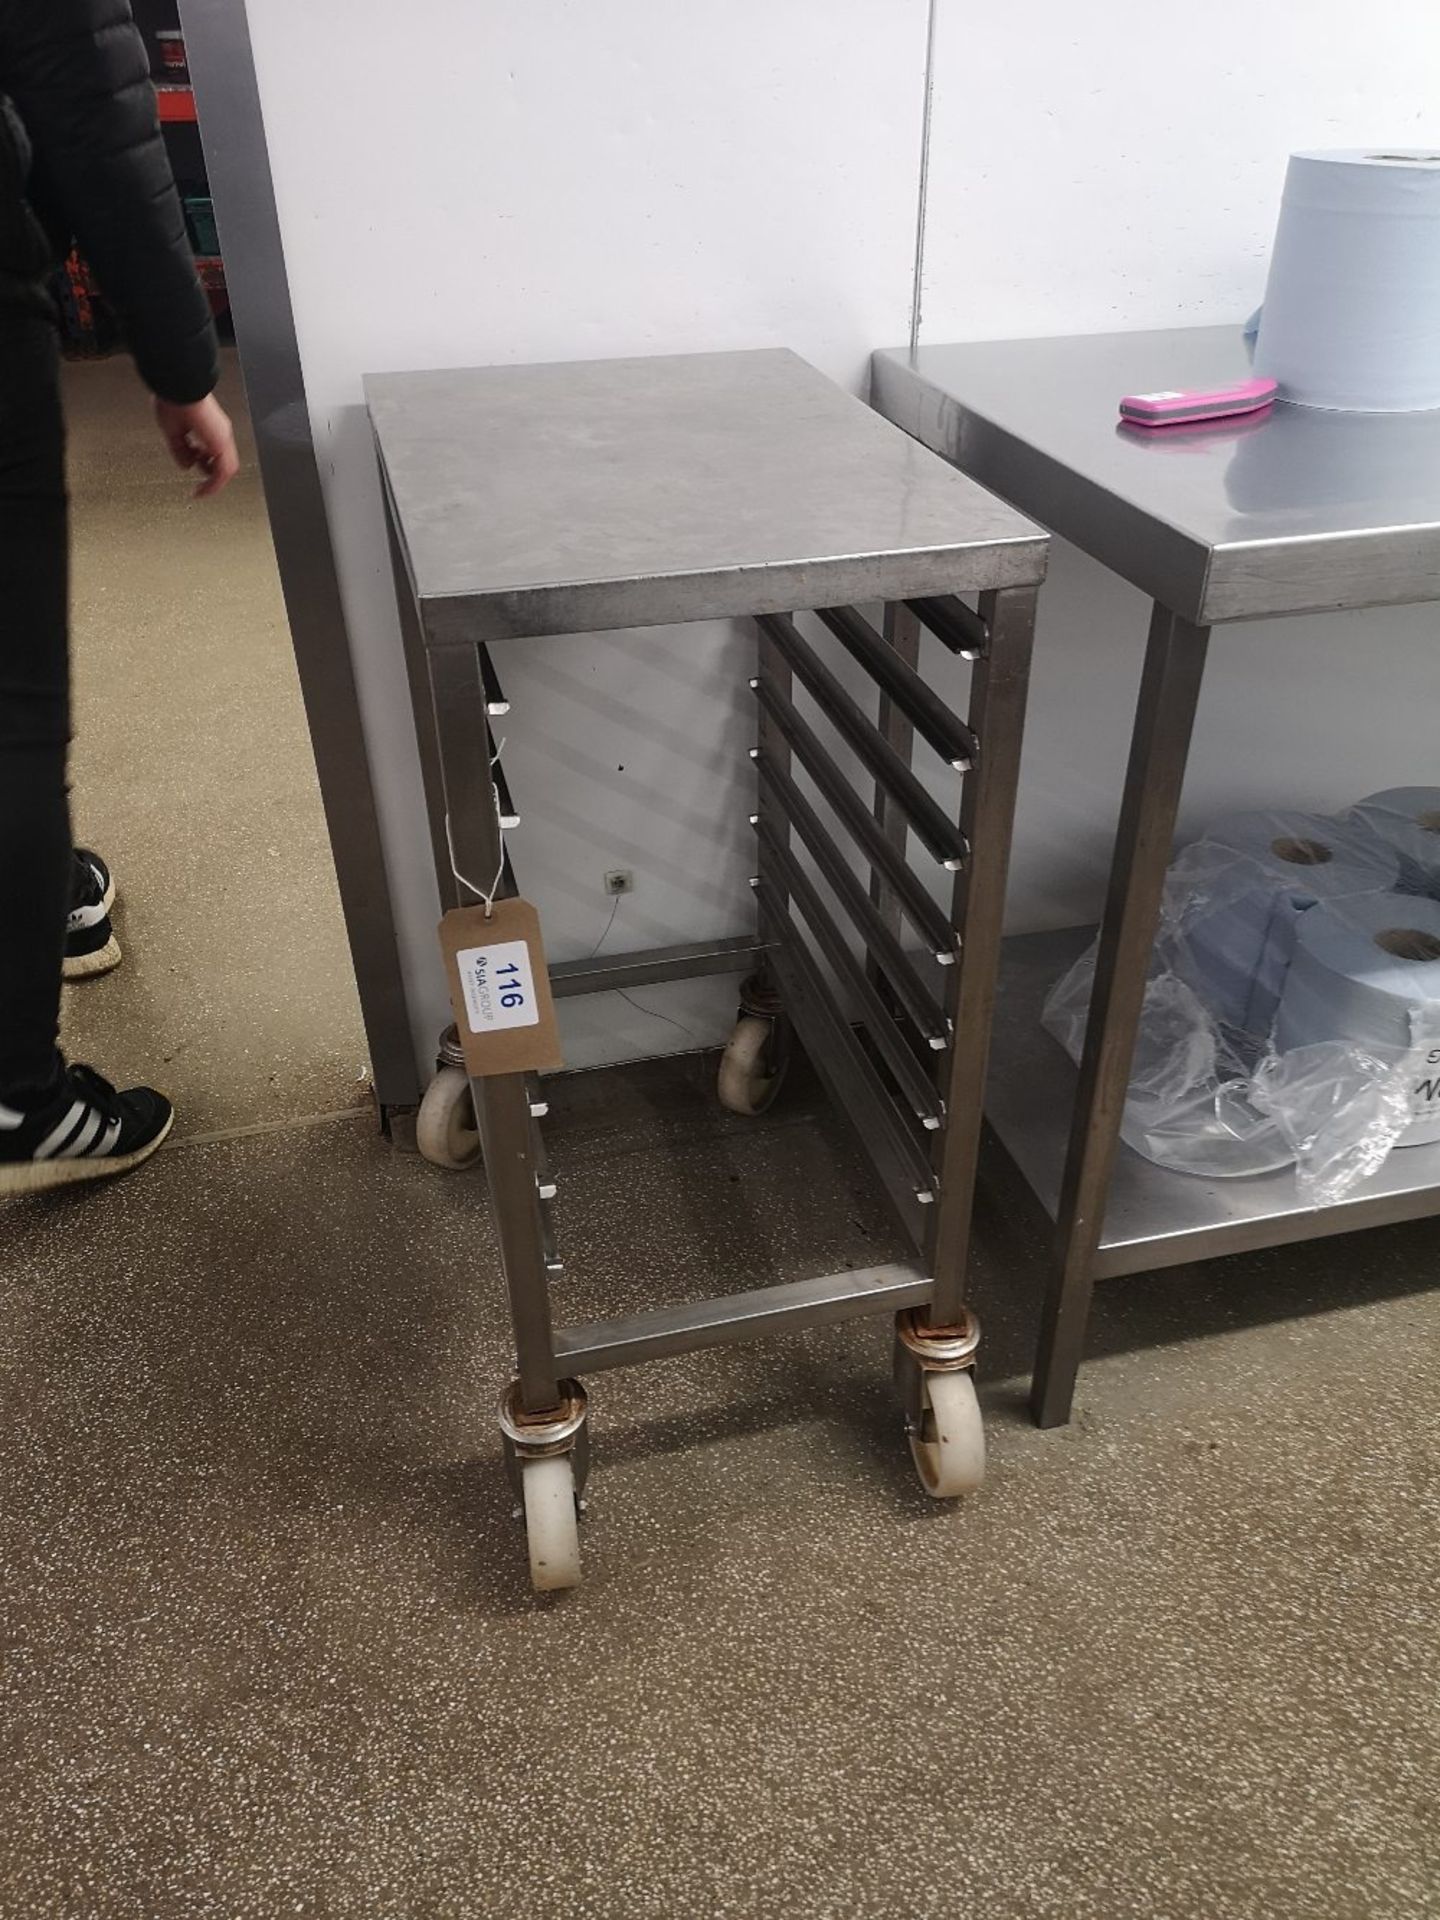 Mobile Stainless Steel Preparation Table with Seven Slot Baking Tray Rack - Image 2 of 2